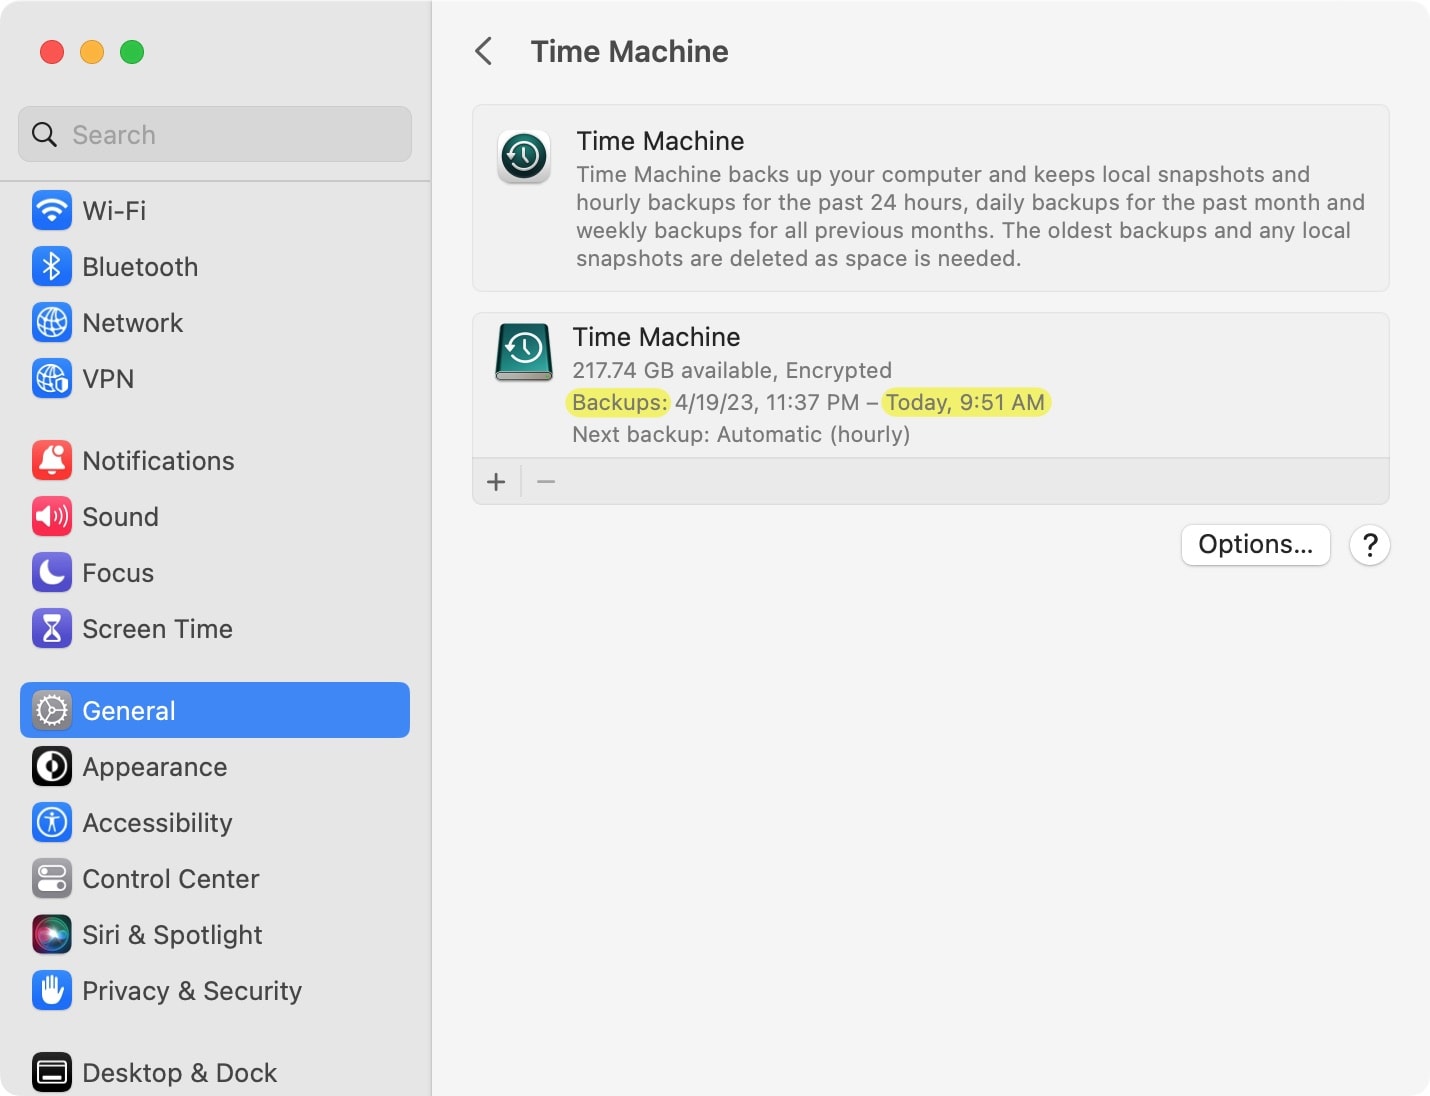 Check Time Machine backups in System Settings